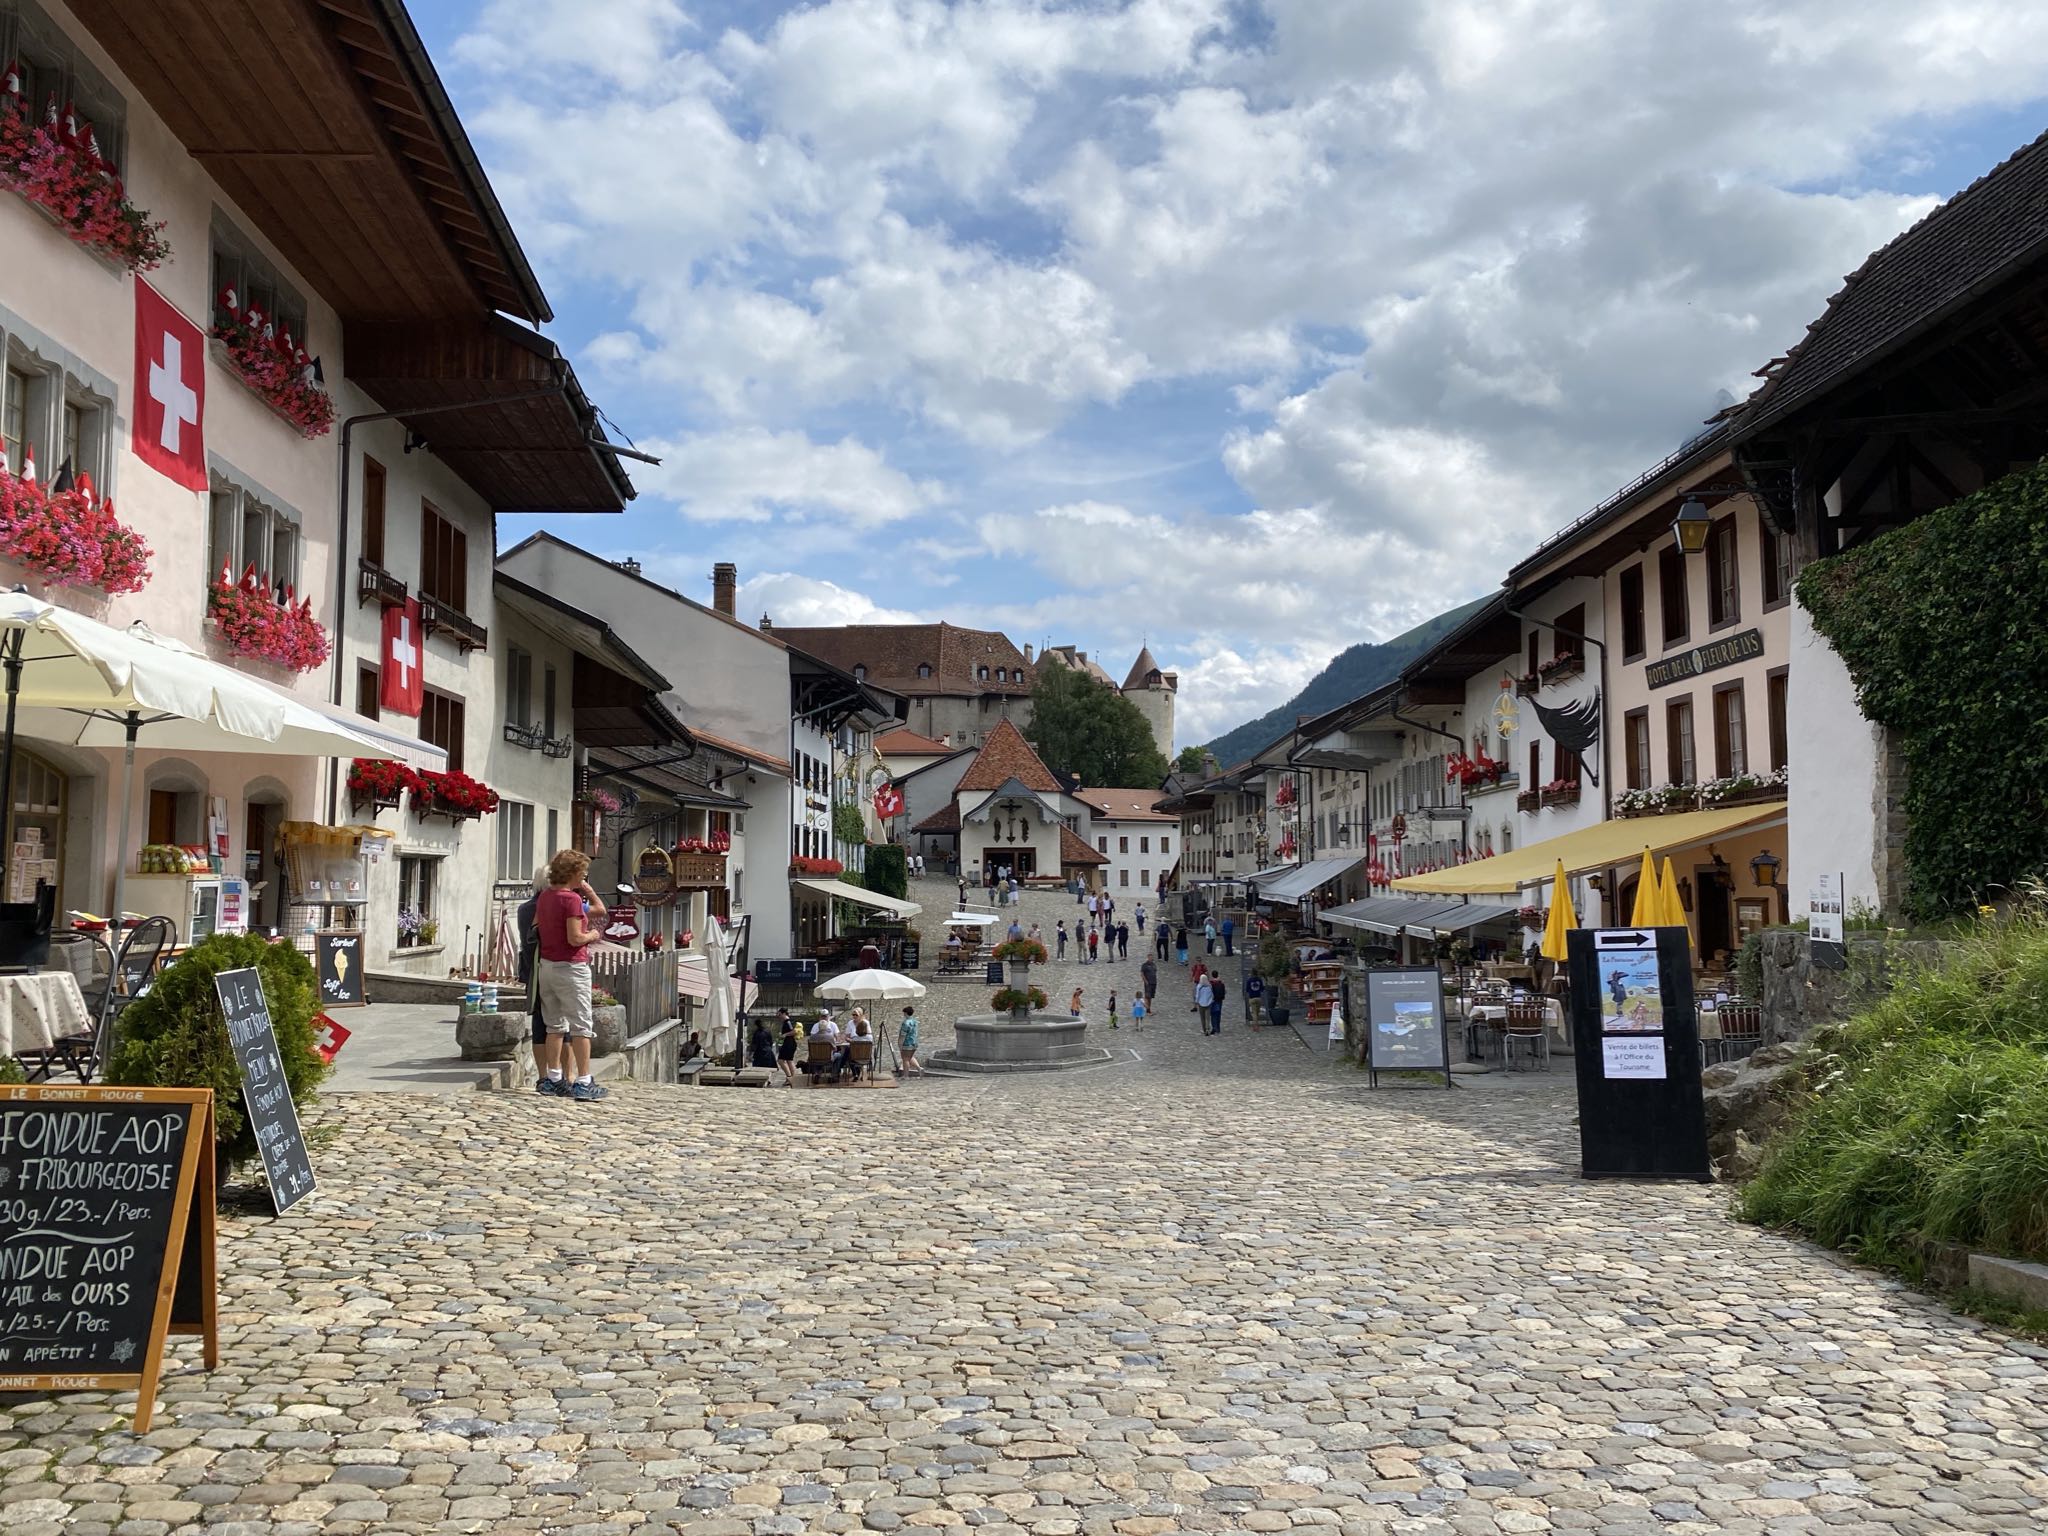 Photo 1 of 34 from the album Gruyères 2021.